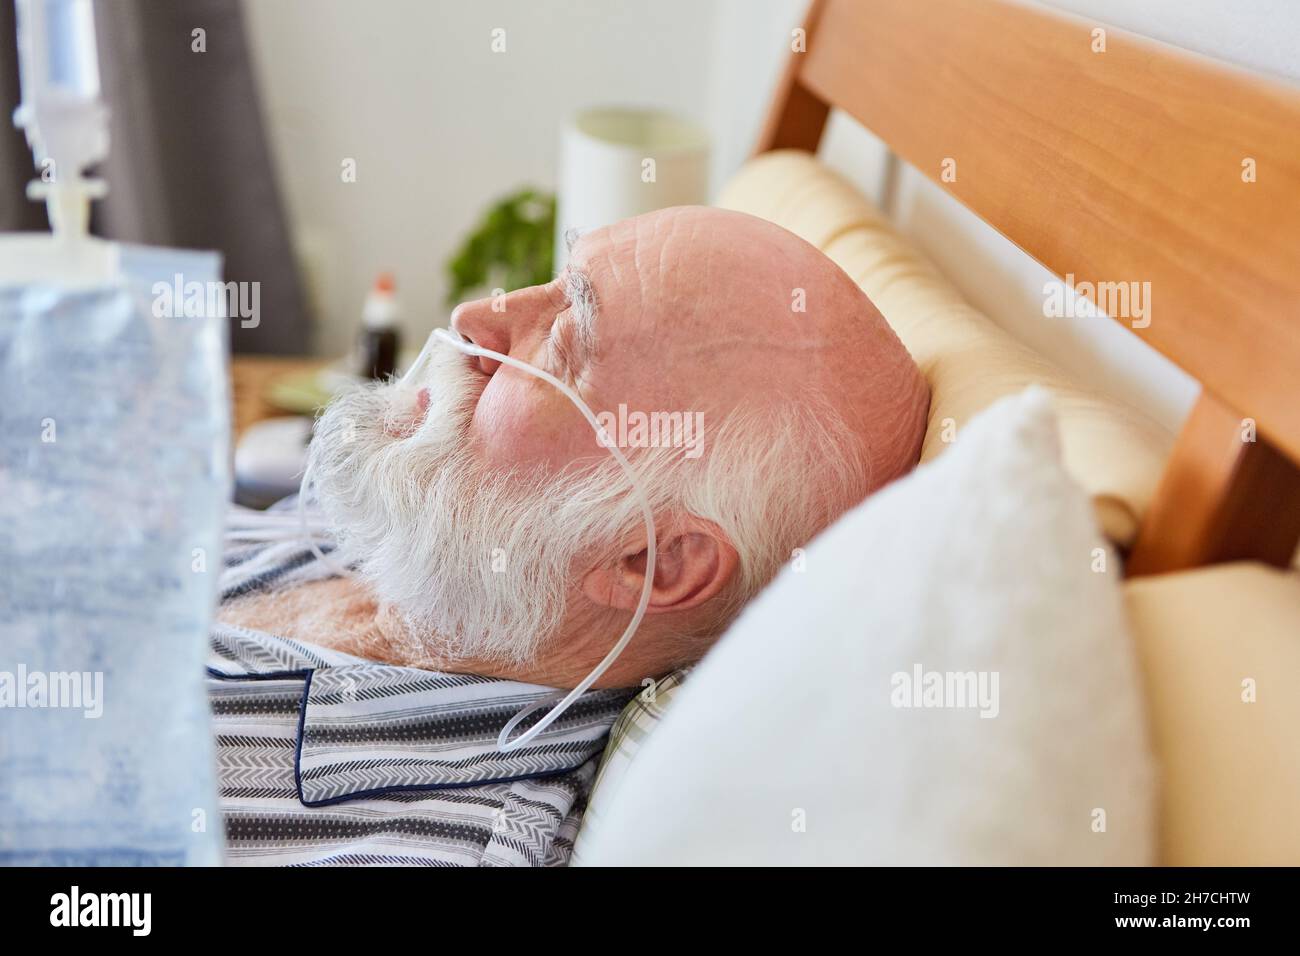 Sick senior with nasal cannula during oxygen treatment and with infusion bag in the foreground Stock Photo